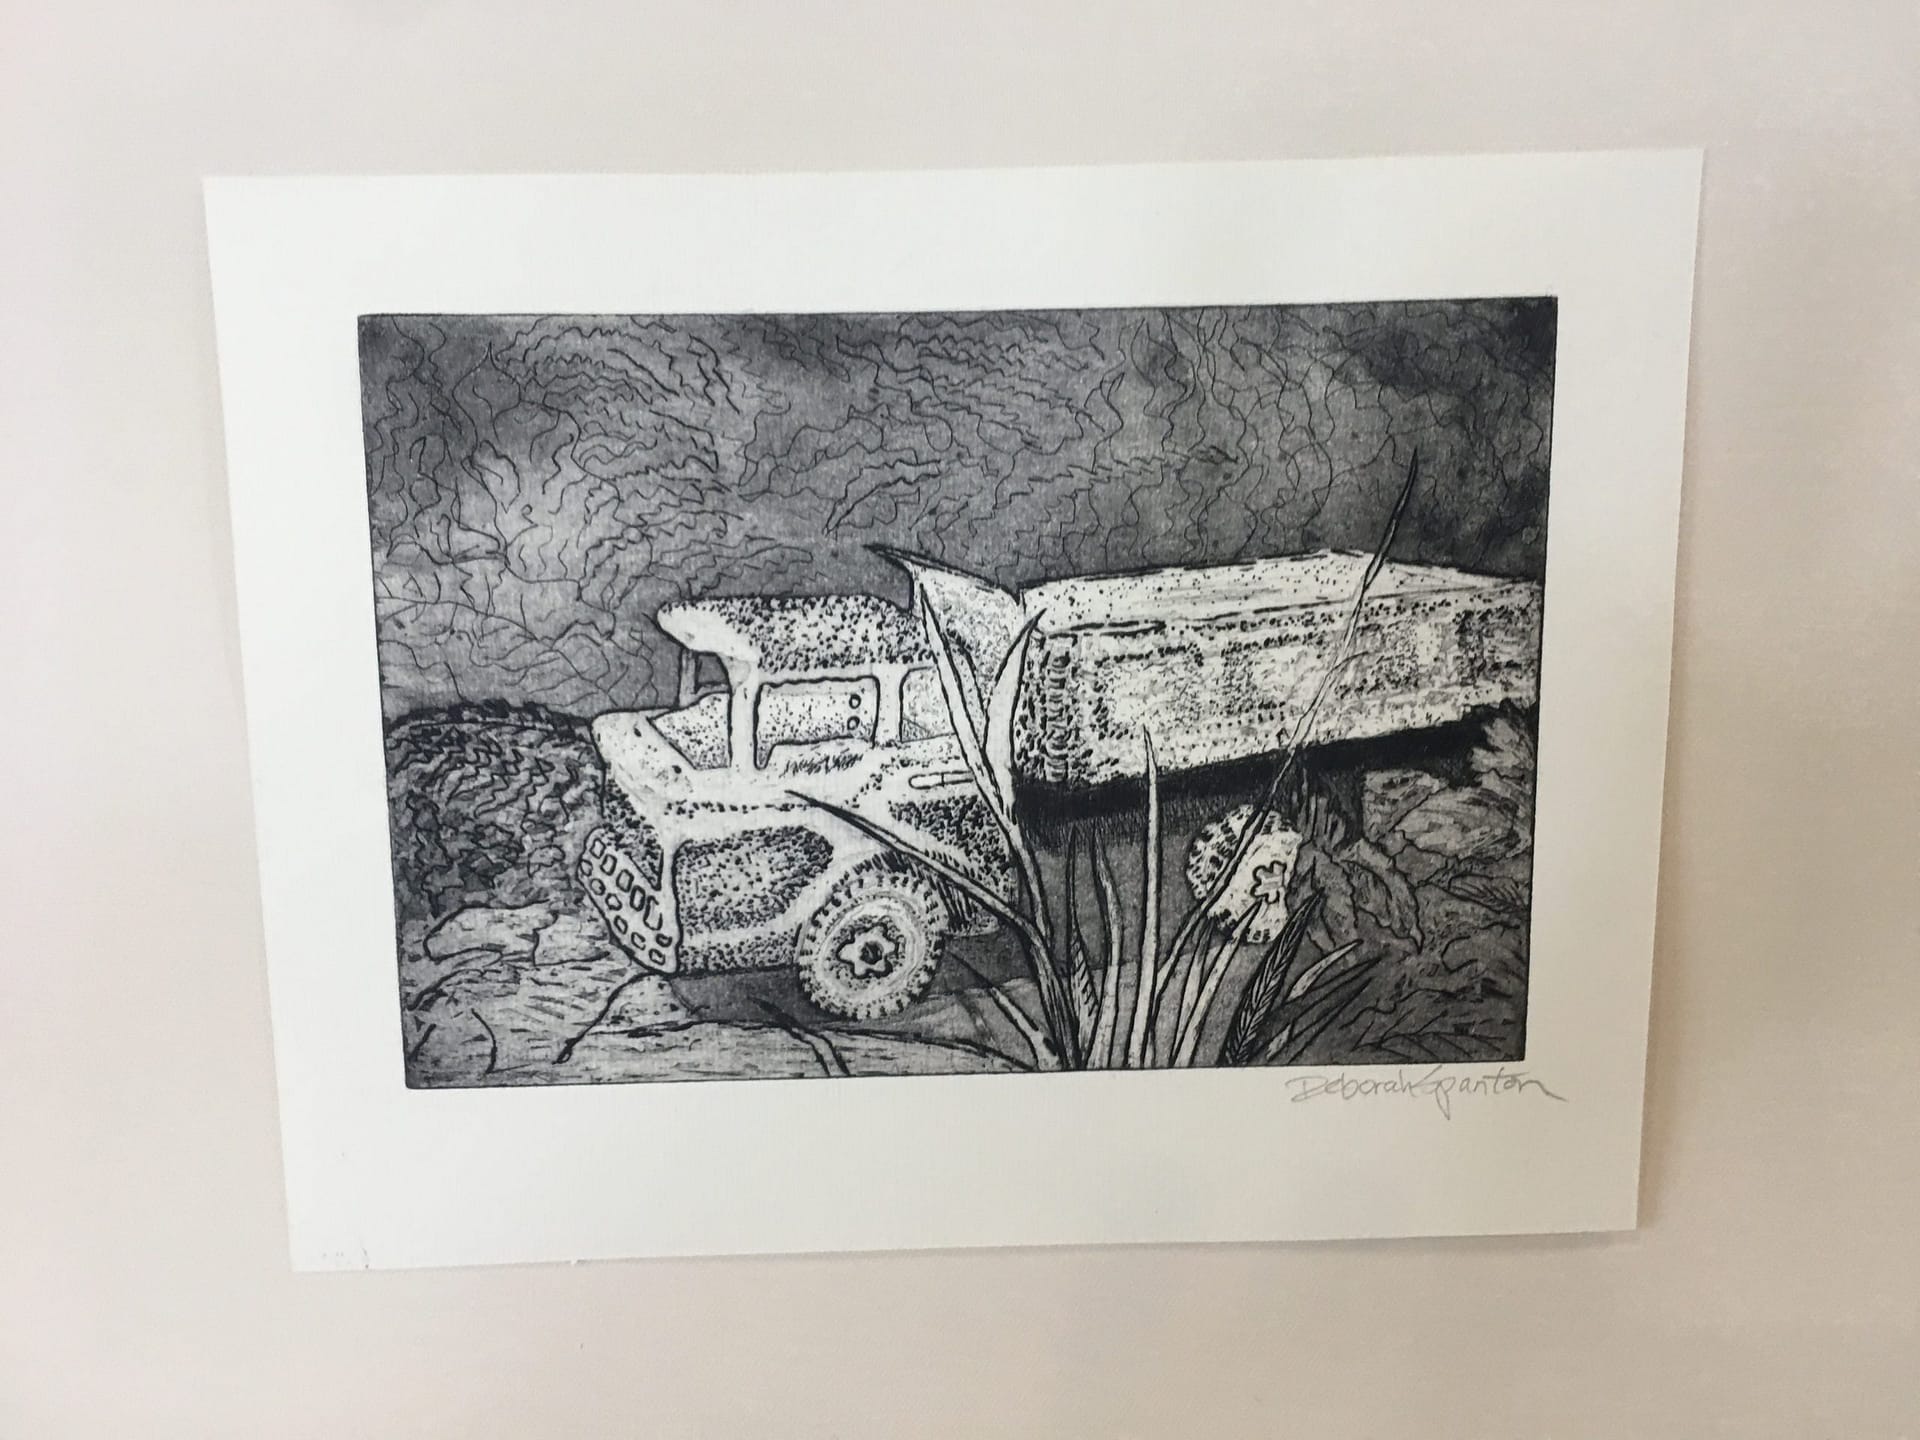 Etching: Truck edition 1 of 2